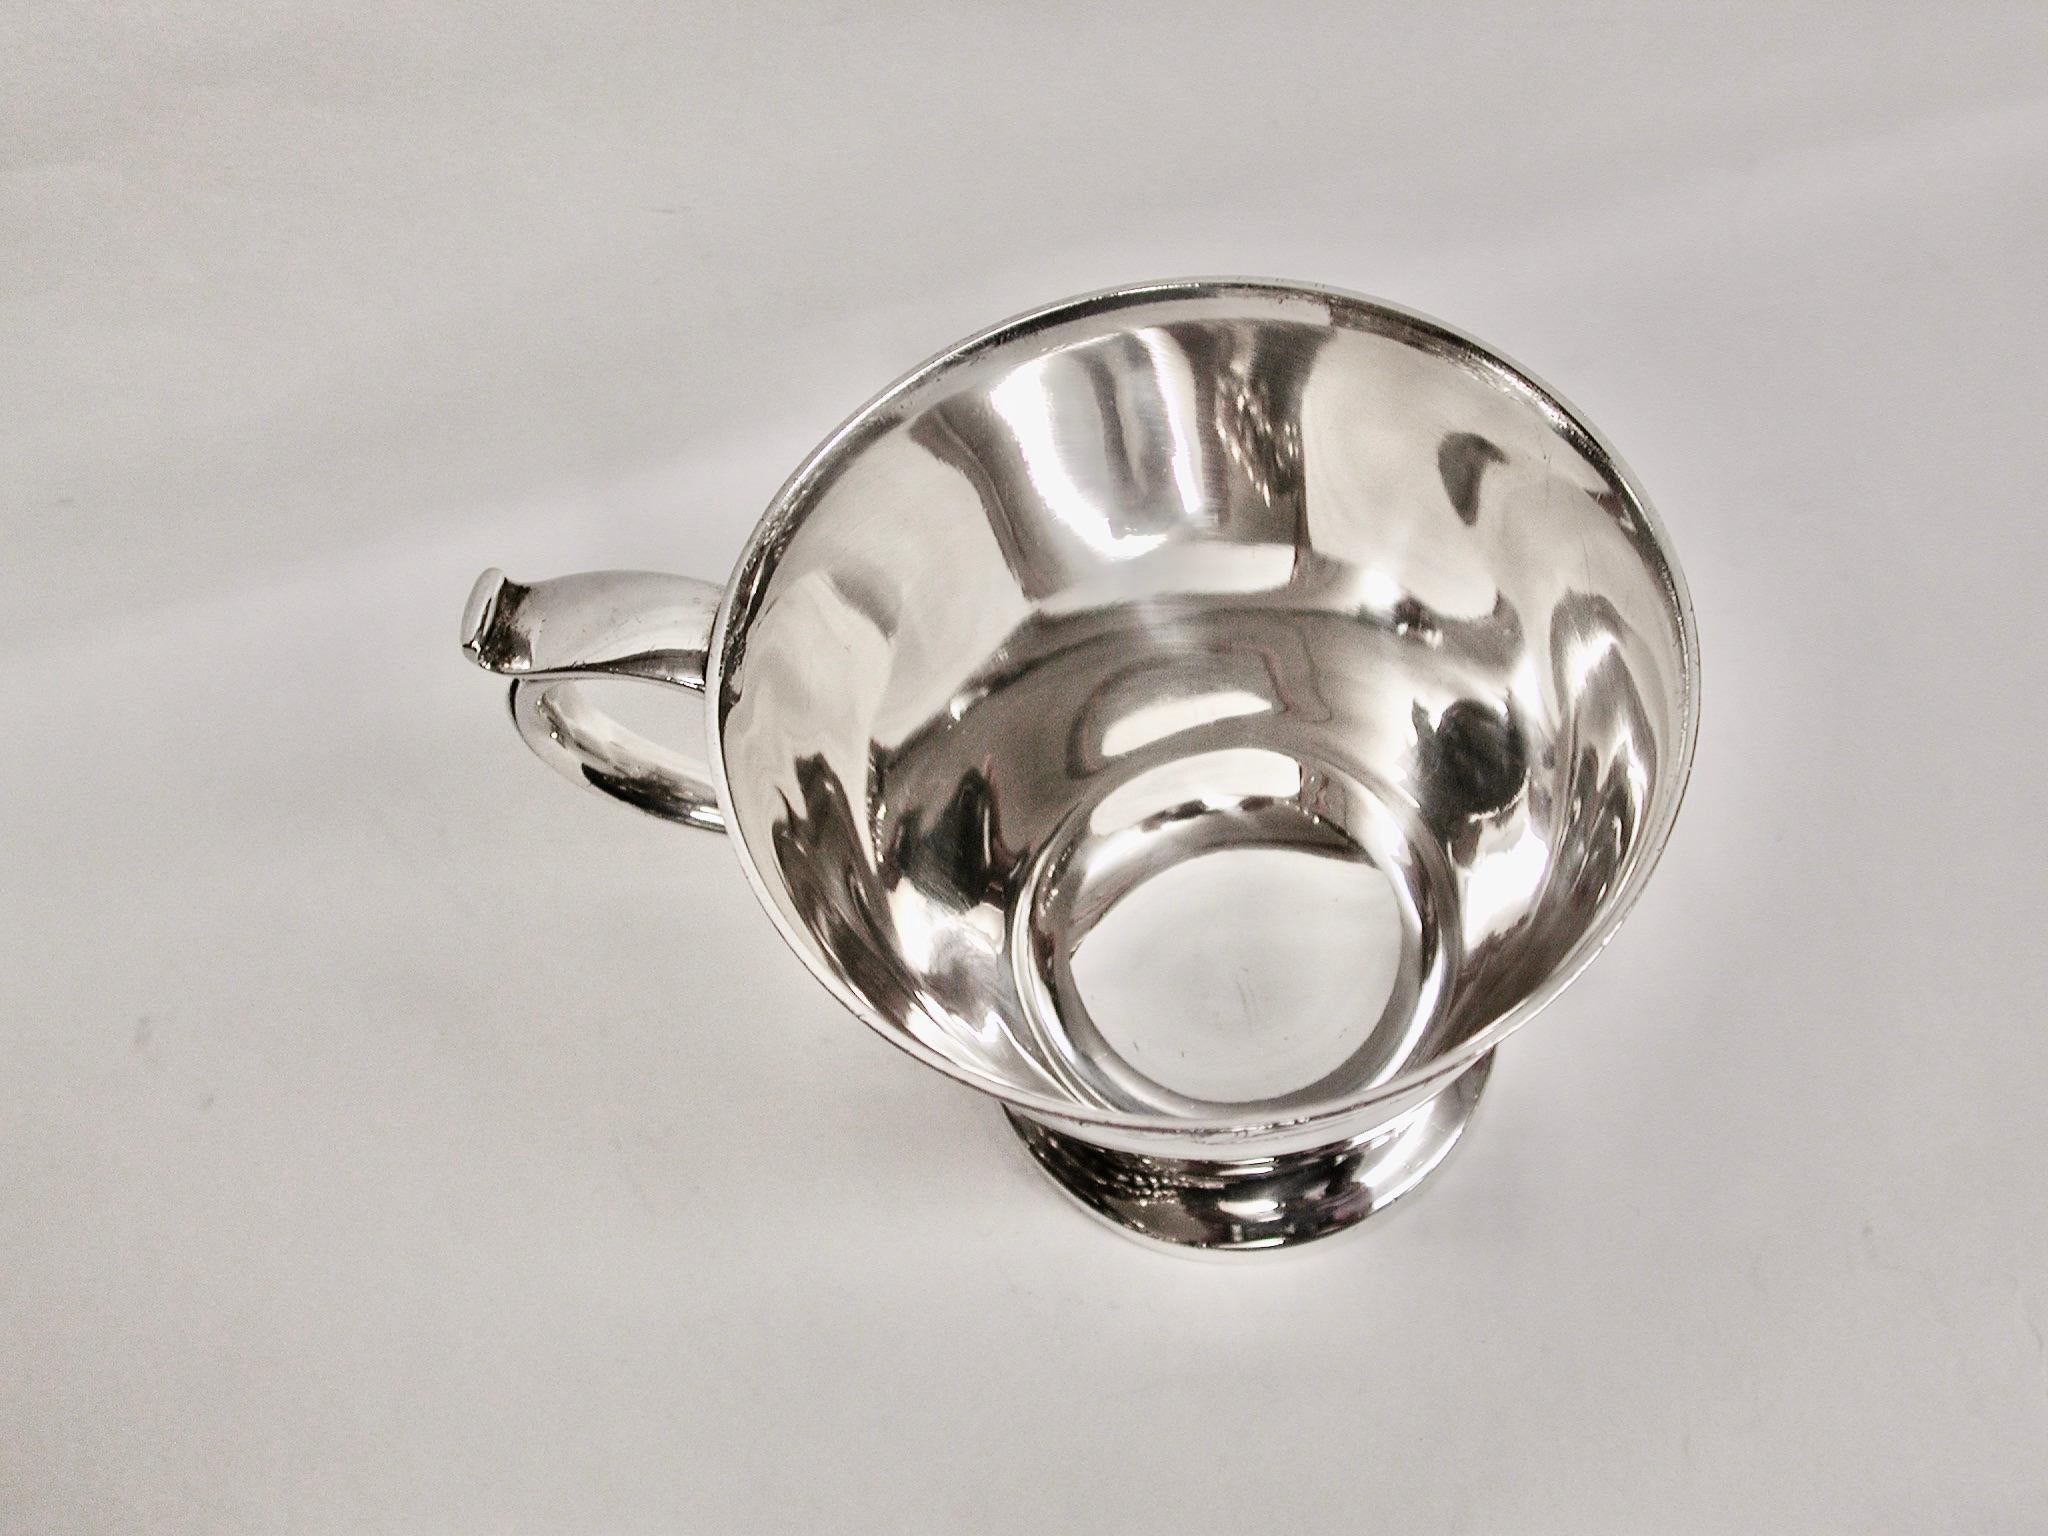 English Silver Childs Mug with Mythical Scenes, Thomas Bradbury and Sons, Sheffield, 1936 For Sale